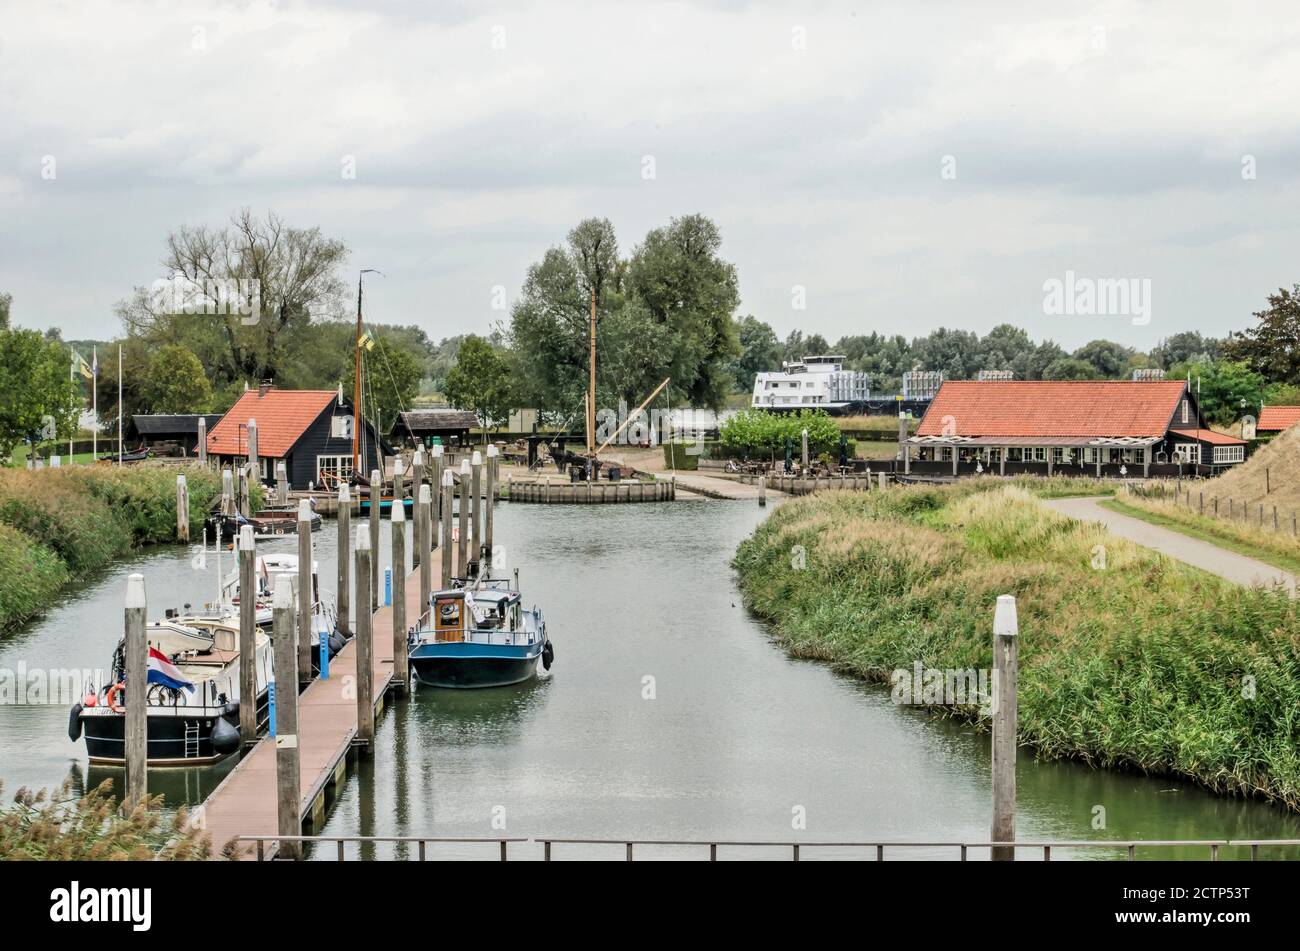 Woudrichem, The Netherlands, September 23, 2020: canal as part of the town's fortifications, with a small marina, wooden buildings and a large vessel Stock Photo